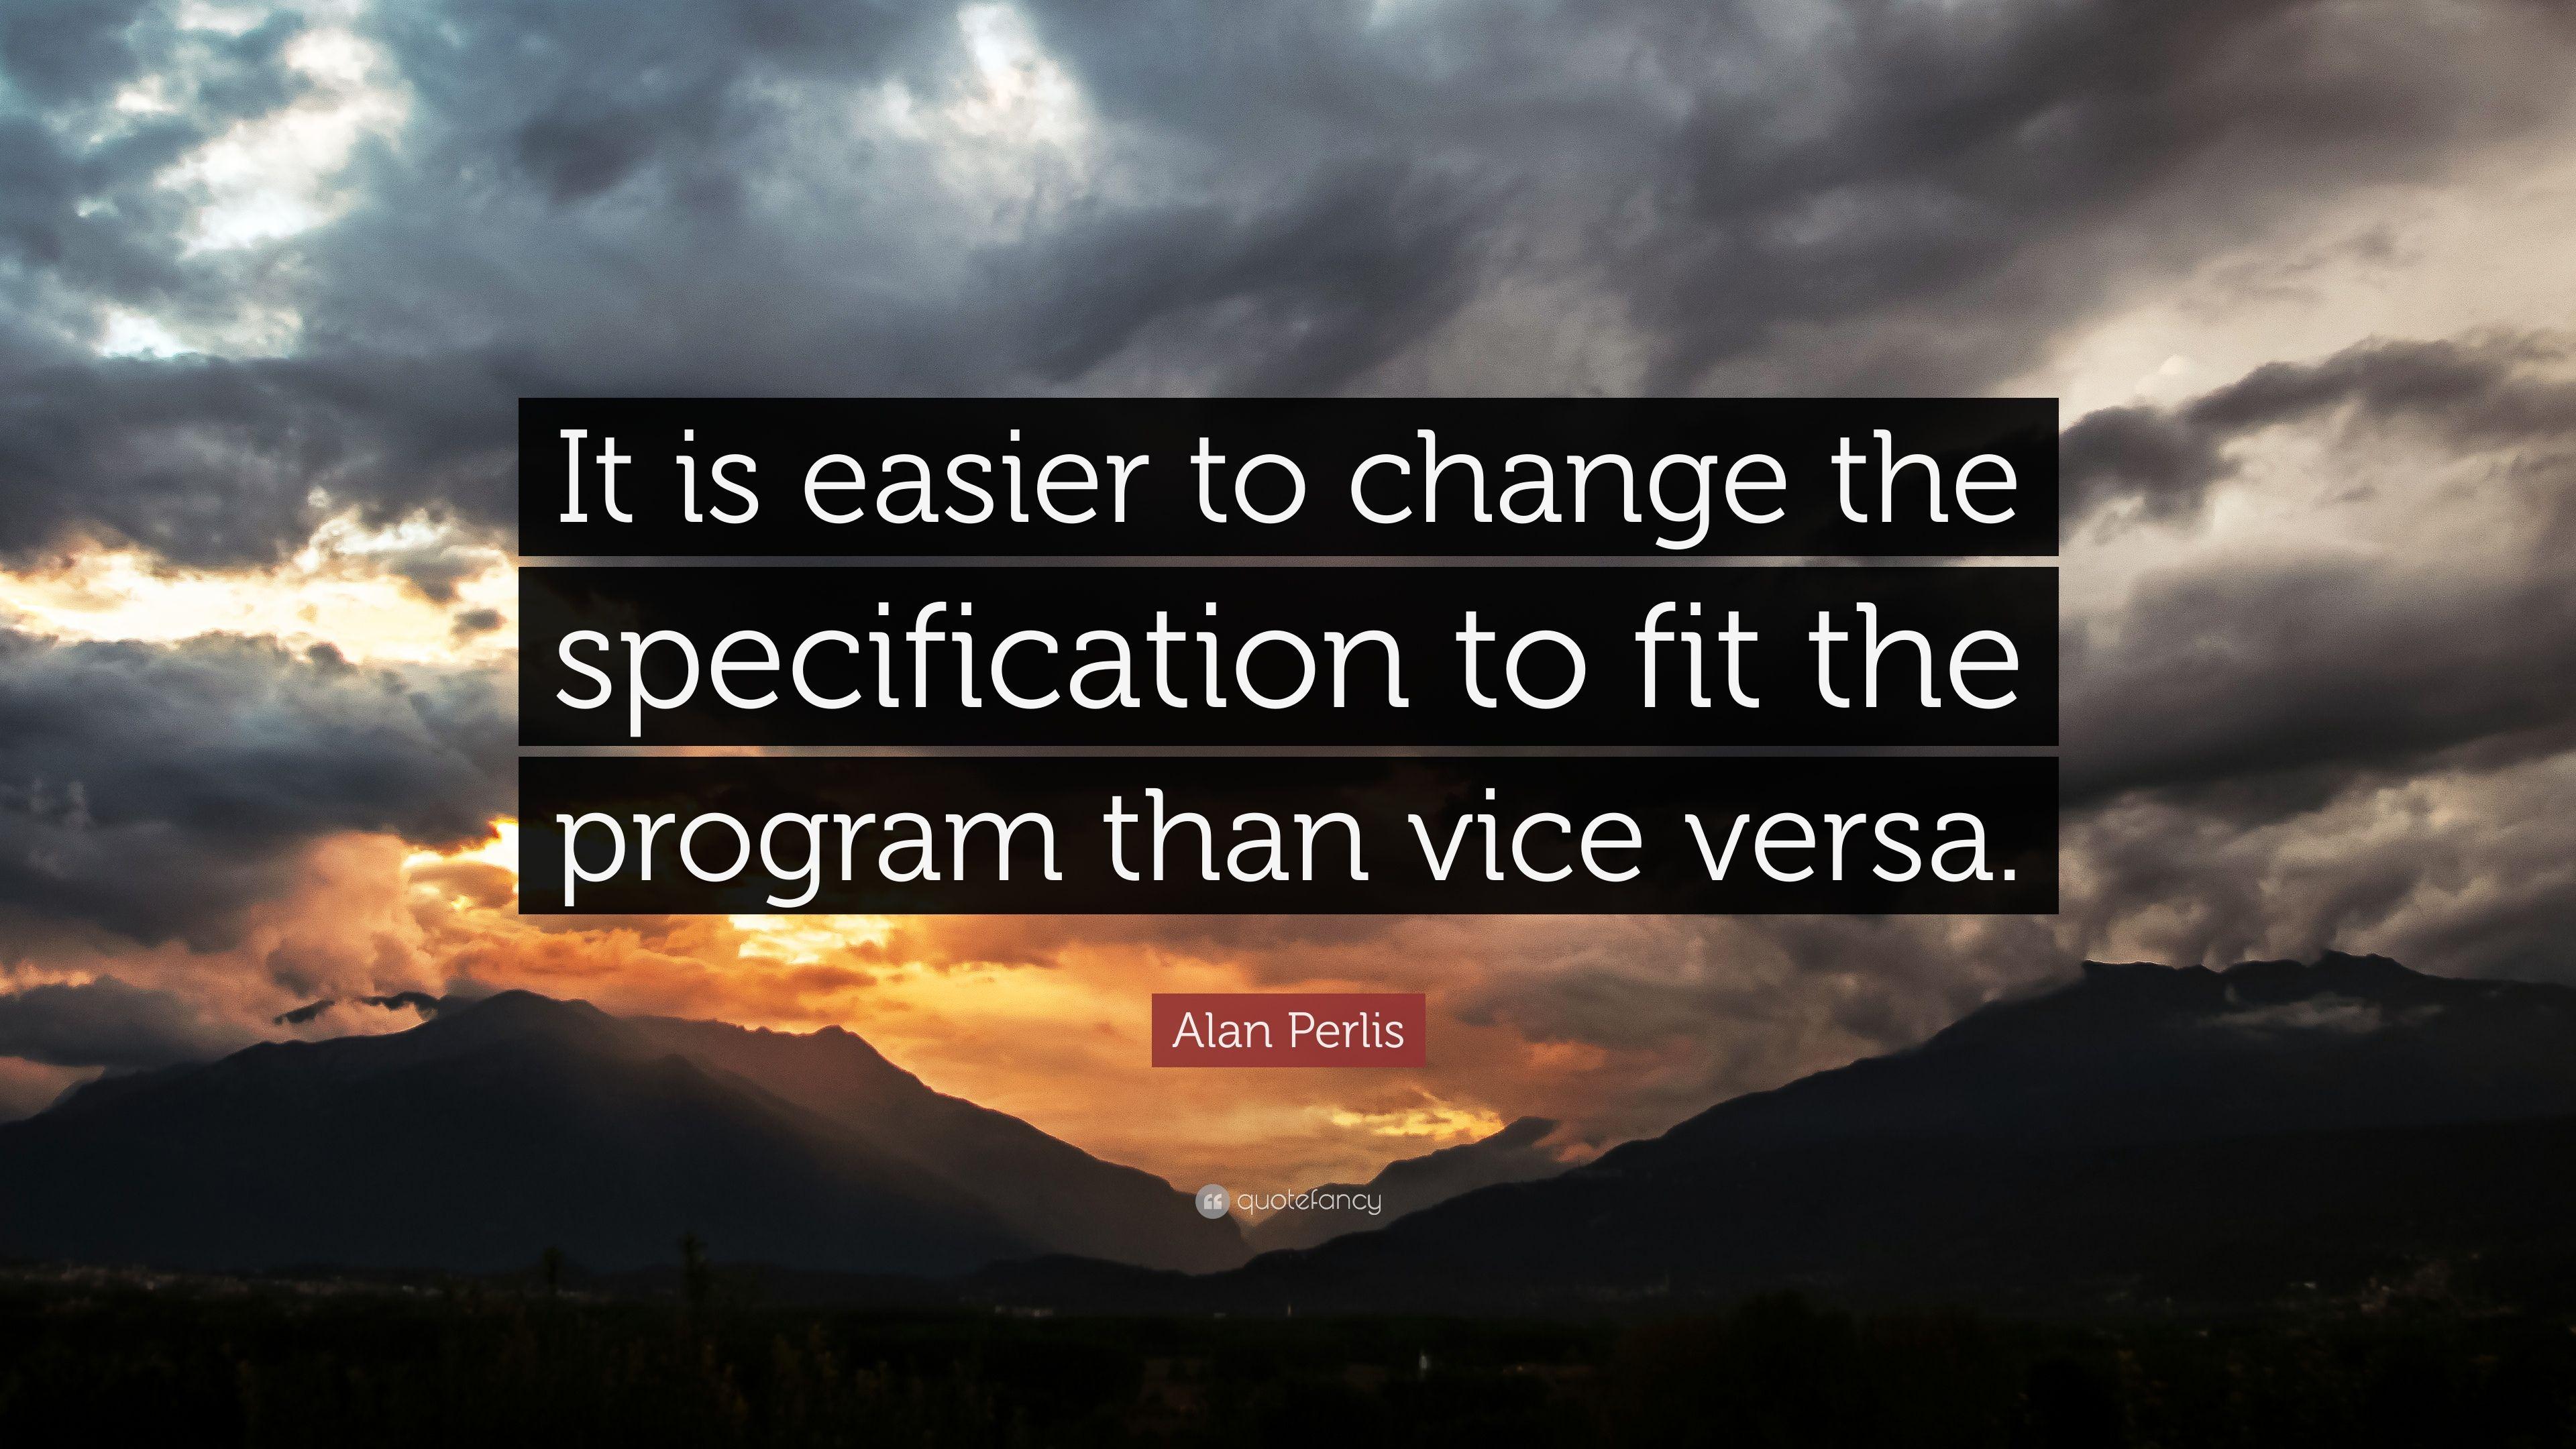 Alan Perlis Quote: “It is easier to change the specification to fit